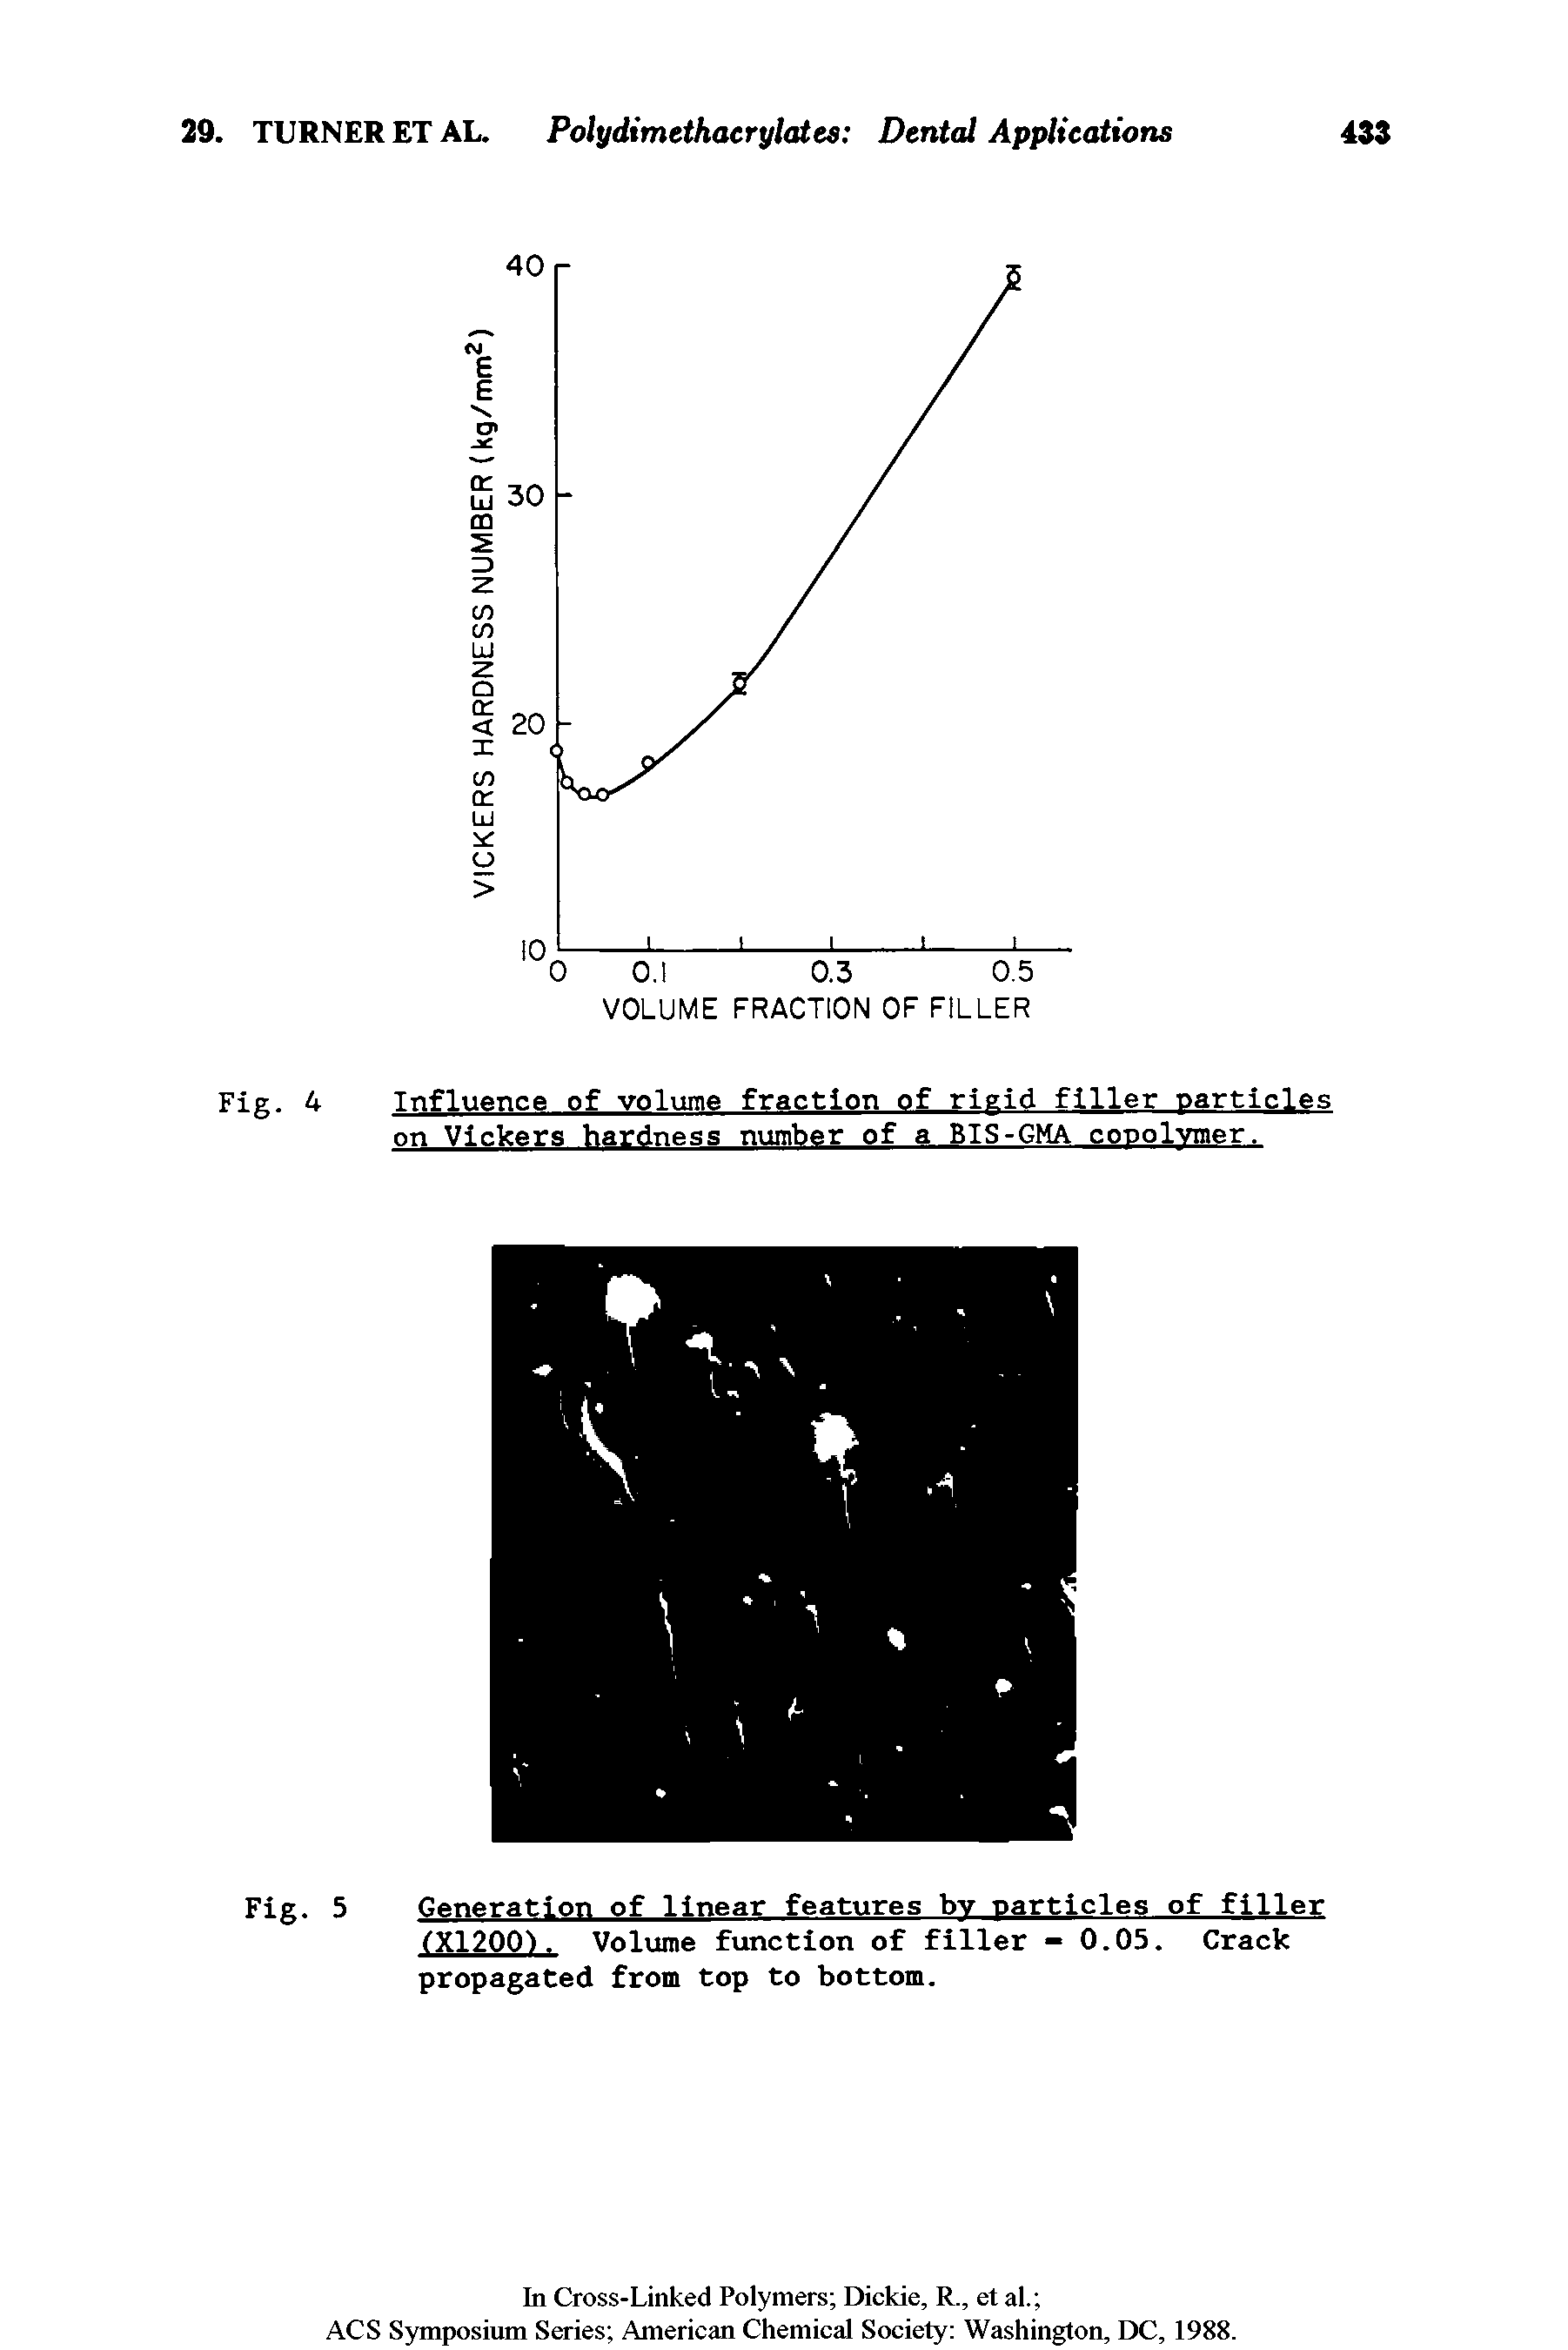 Fig. 4 Influence of volume fraction of rigid filler particles on Vickers hardness number of a BIS-GMA conolymer.